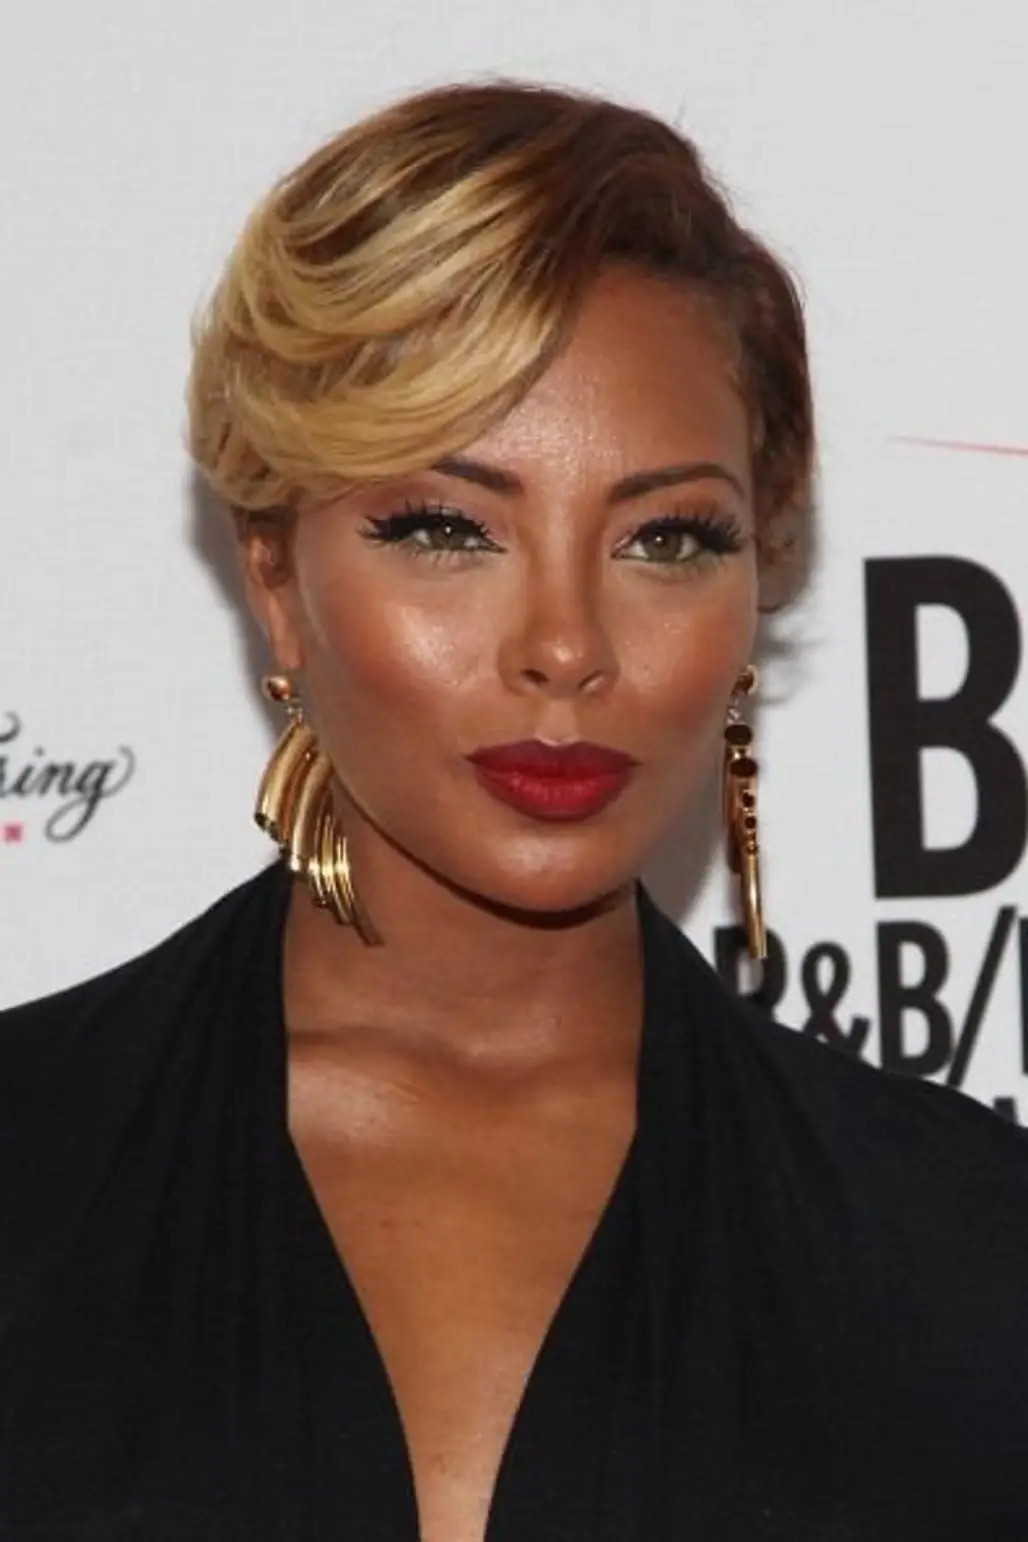 See It in Action: Eva Marcille